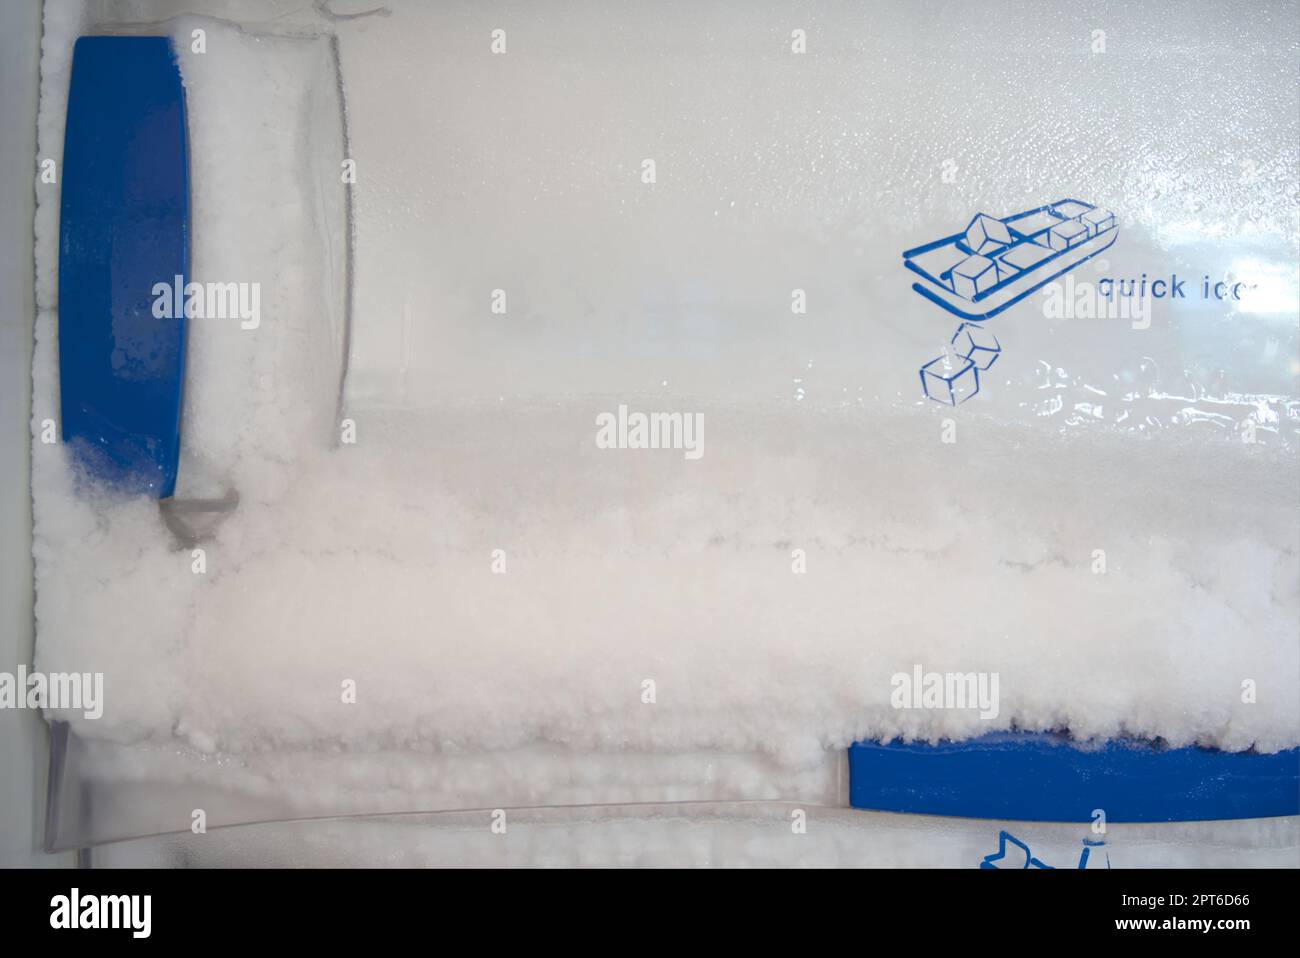 Frost build up in freezer. Harden ice pushing out of freezer door. Stock Photo